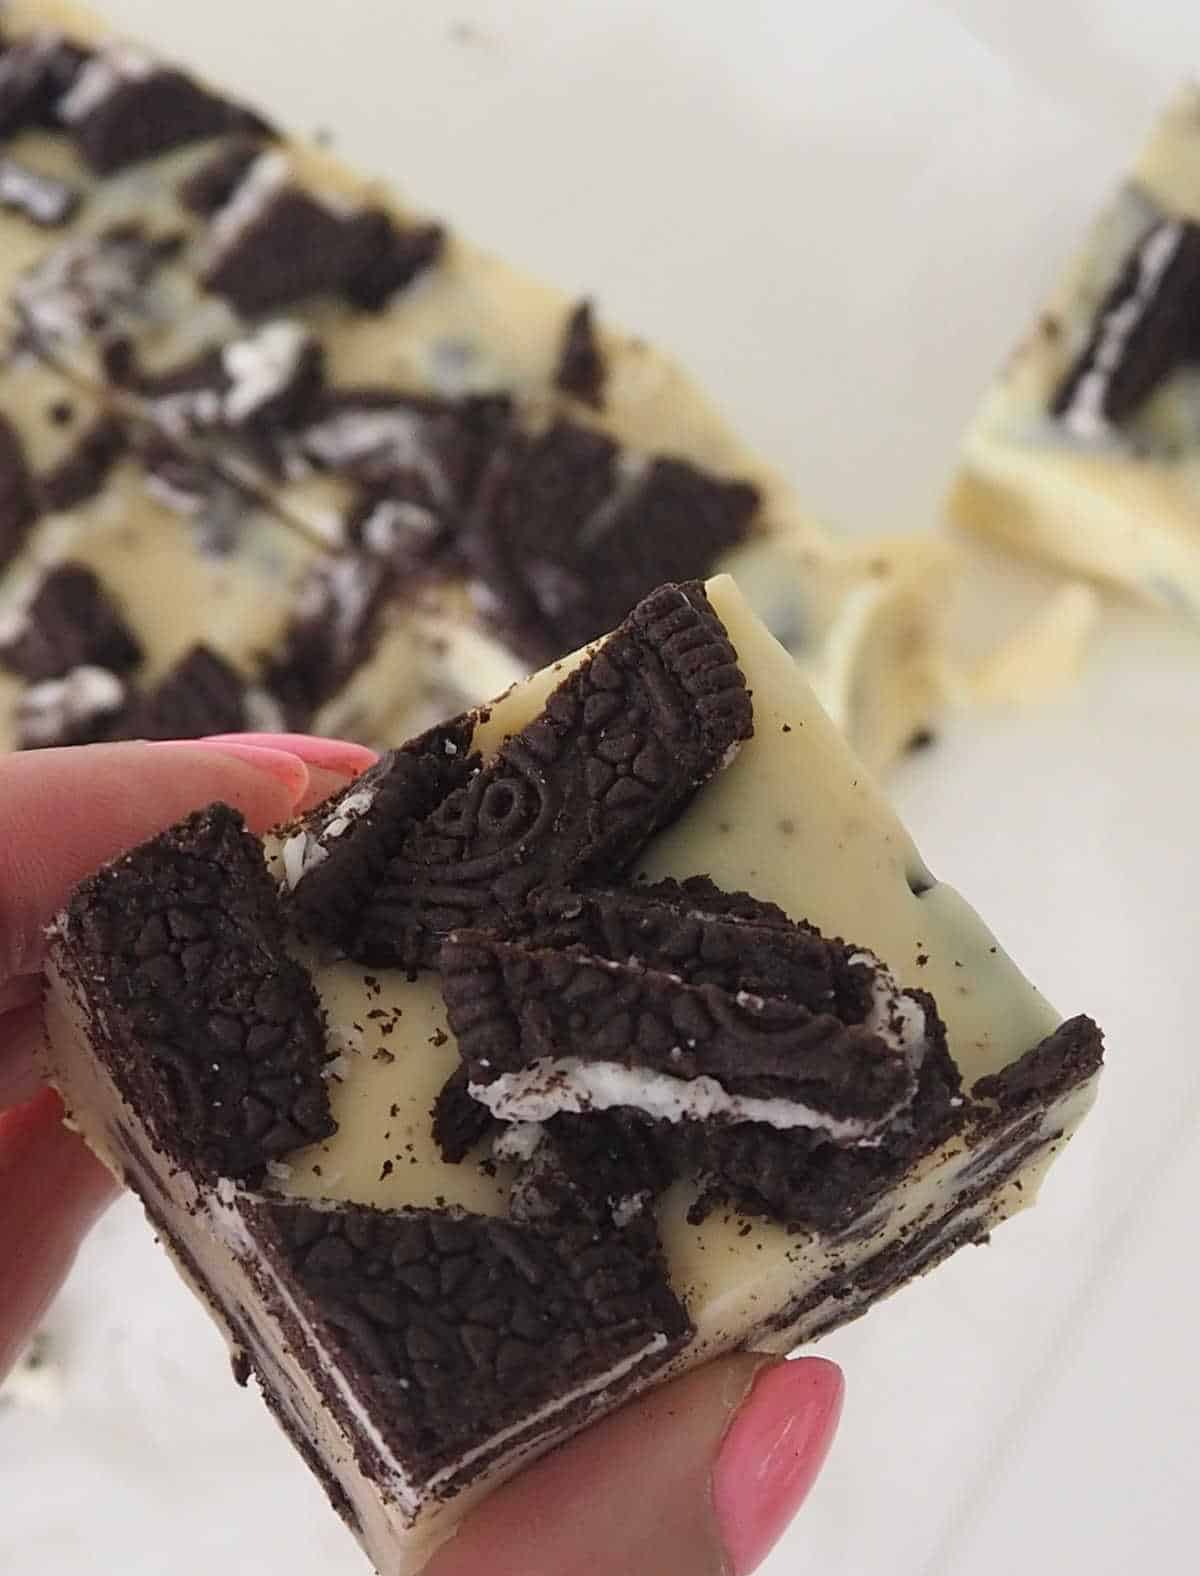 Adult with pink nail polish holding a slice of white chocolate and Oreo fudge.